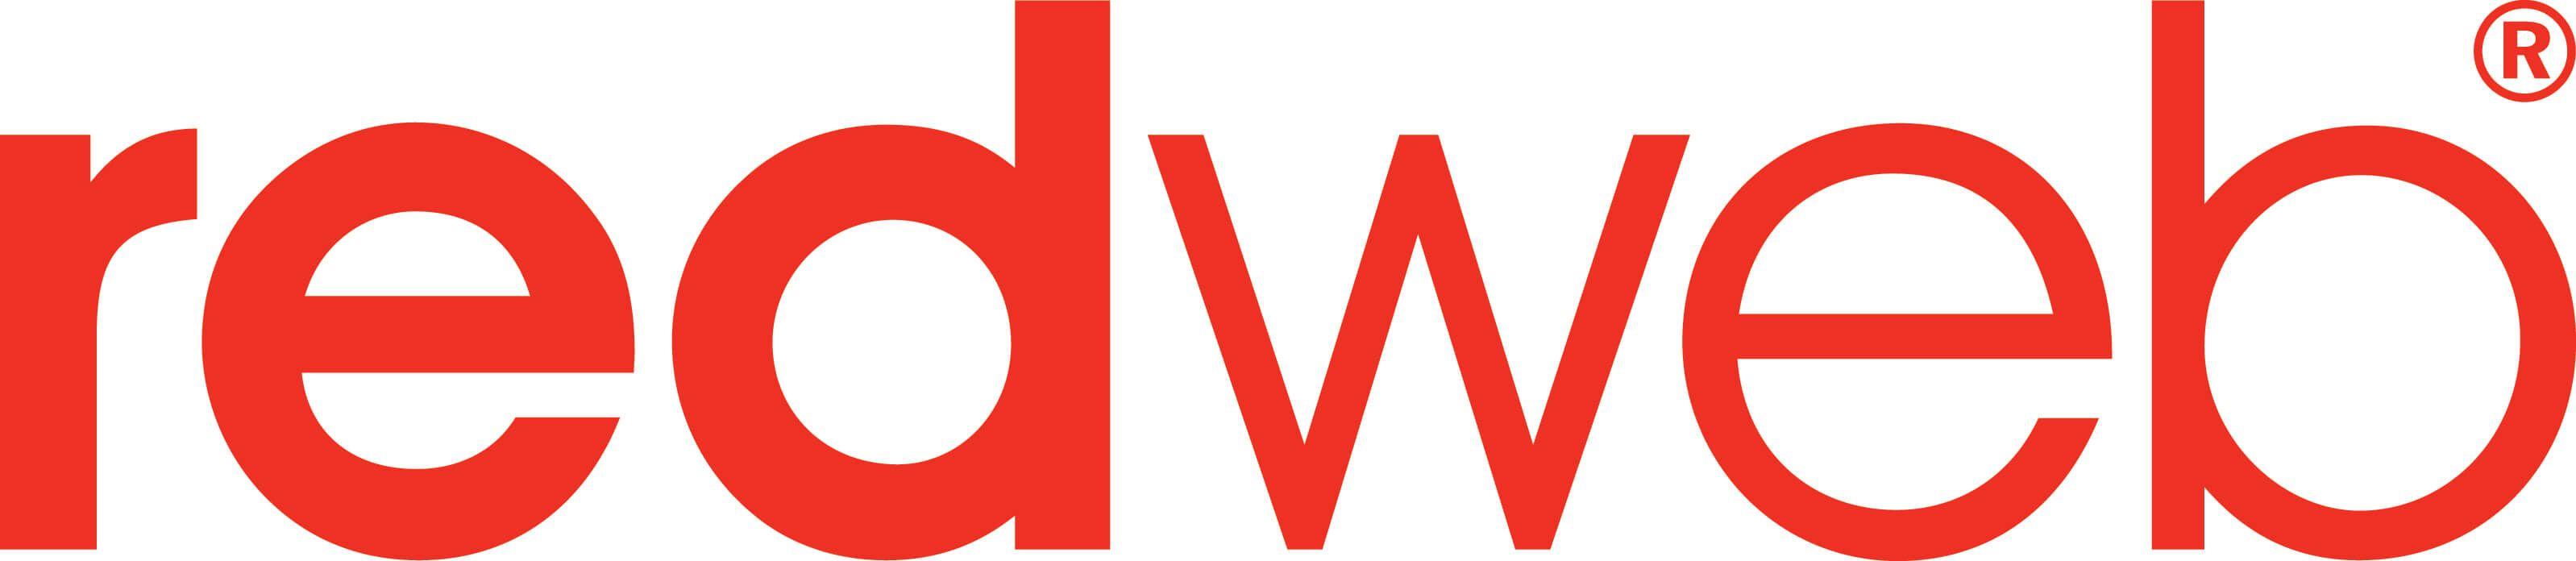 A Red Web Logo - Our Customers | Iomart Group plc